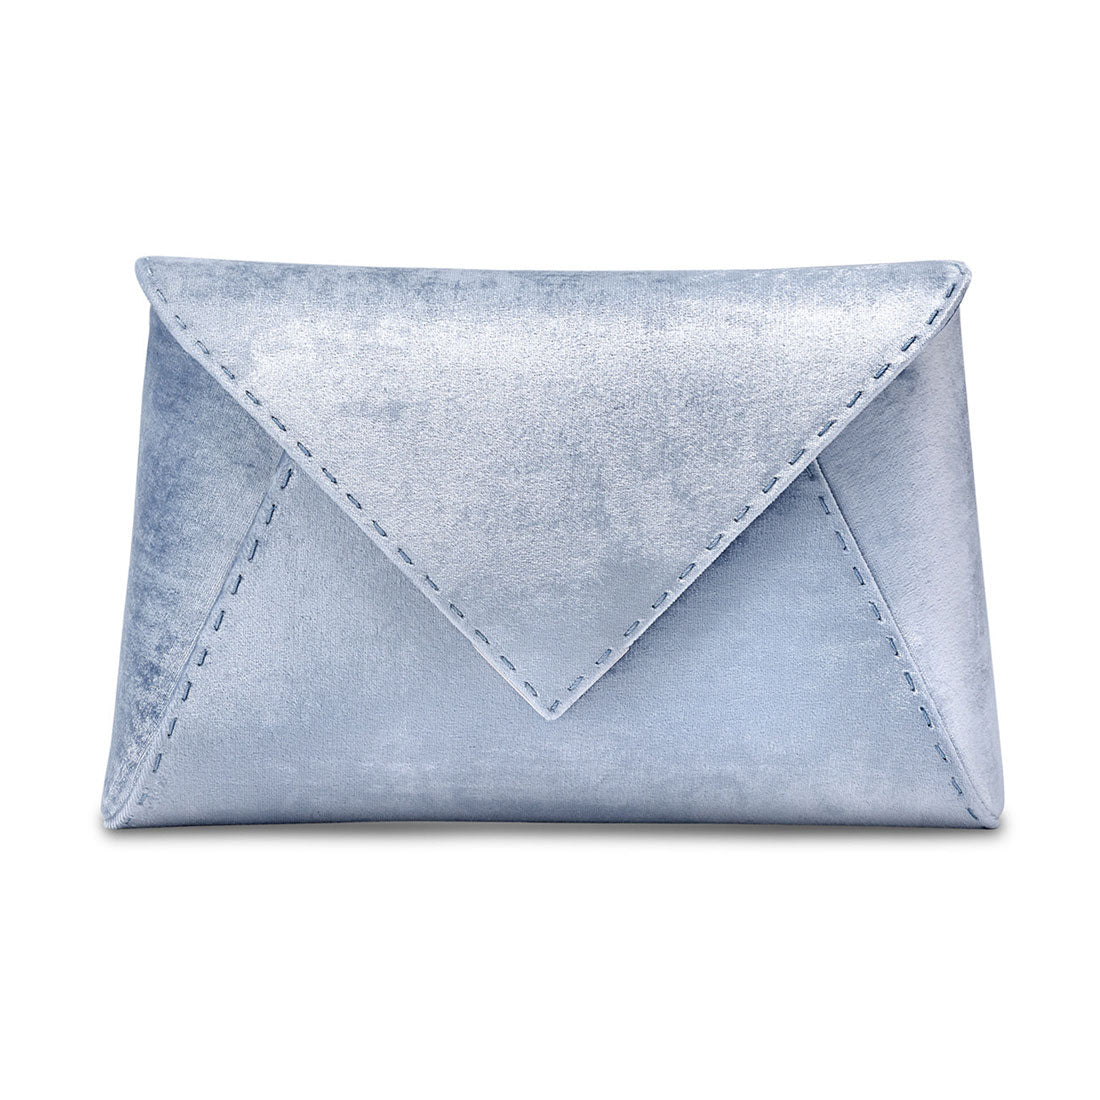 Lee Pouchet Large in Icy Blue Crushed Velvet